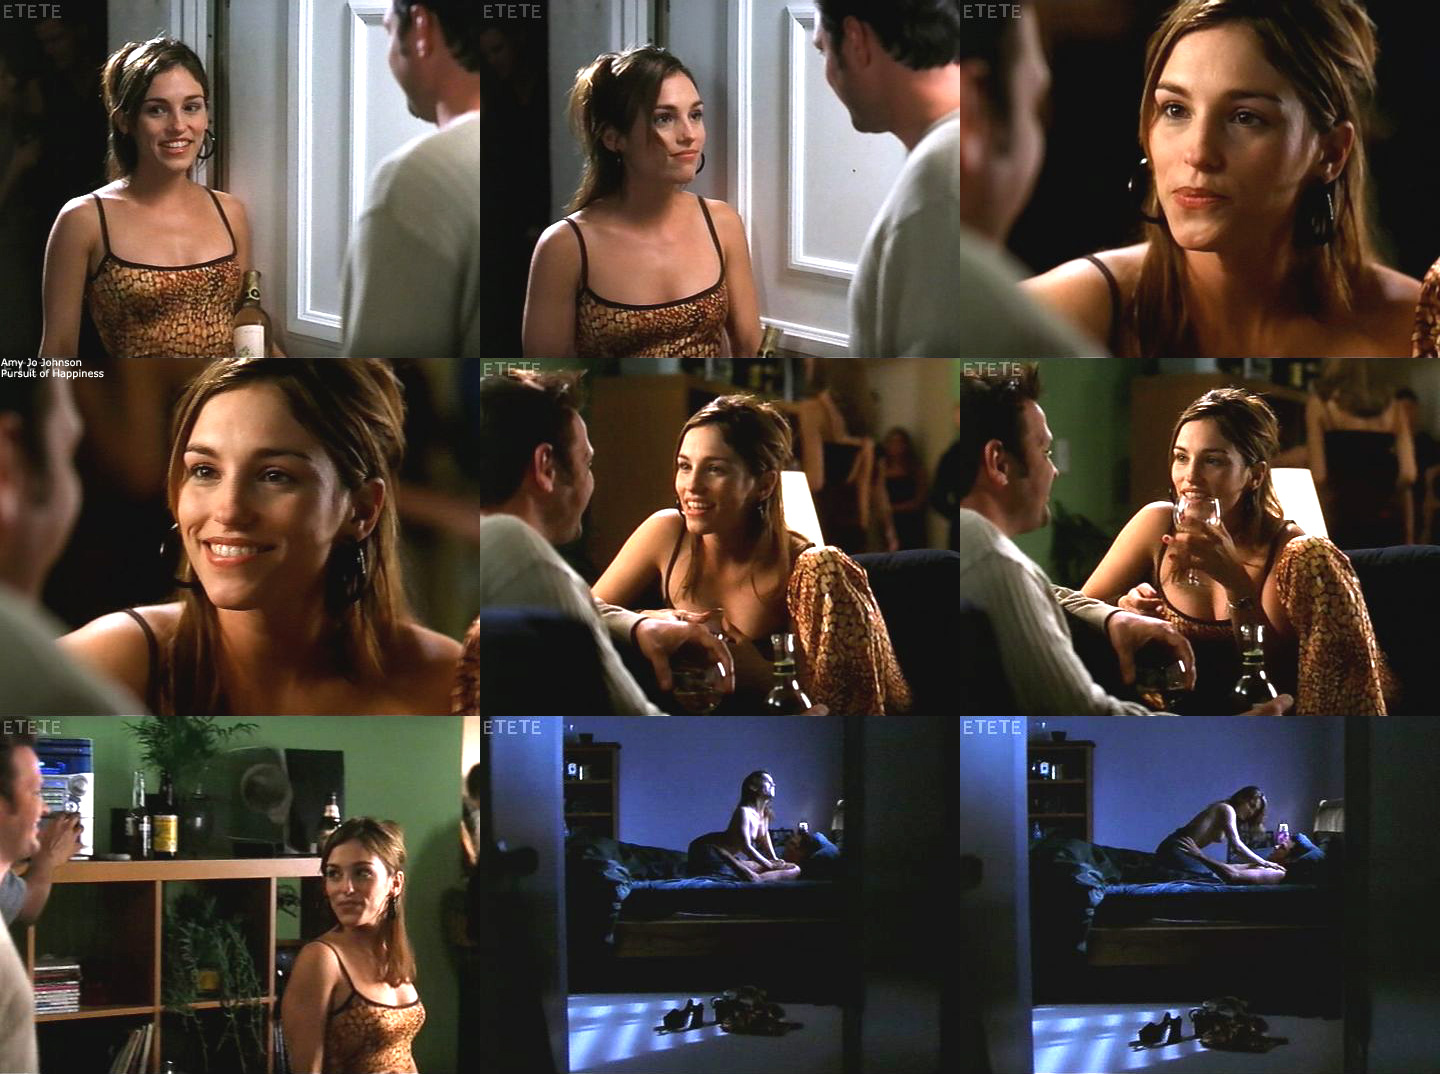 Amy jo johnson pursuit of happiness nude.